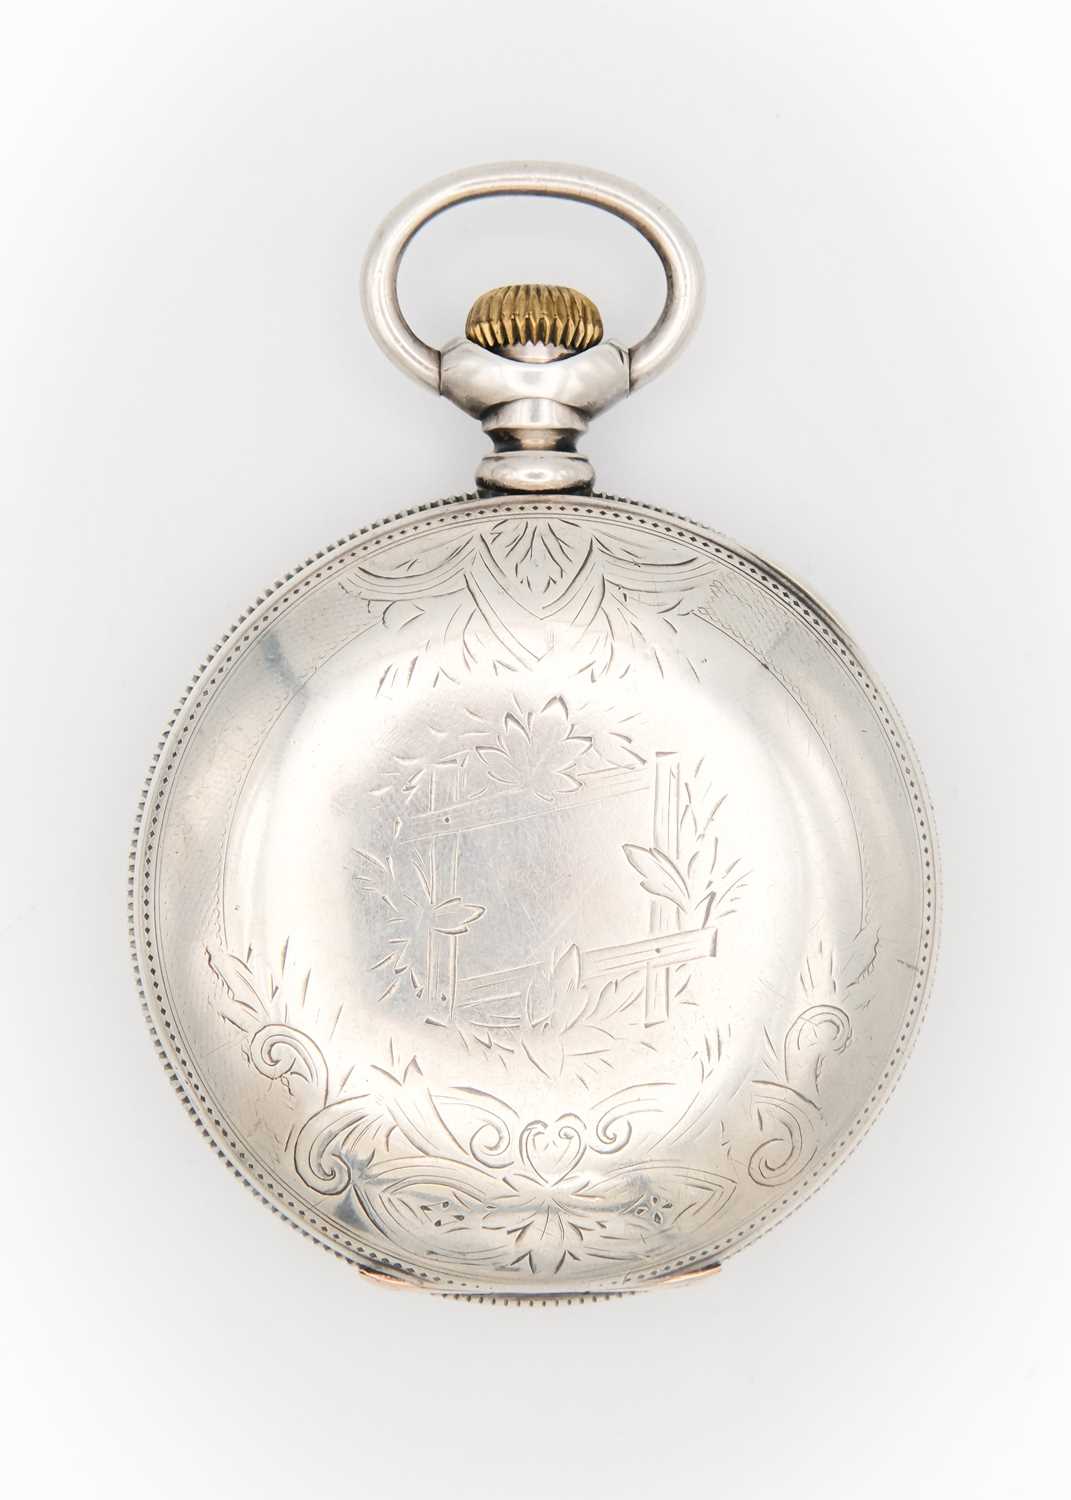 ELGIN - A large silver cased crown wind lever pocket watch. - Image 5 of 6